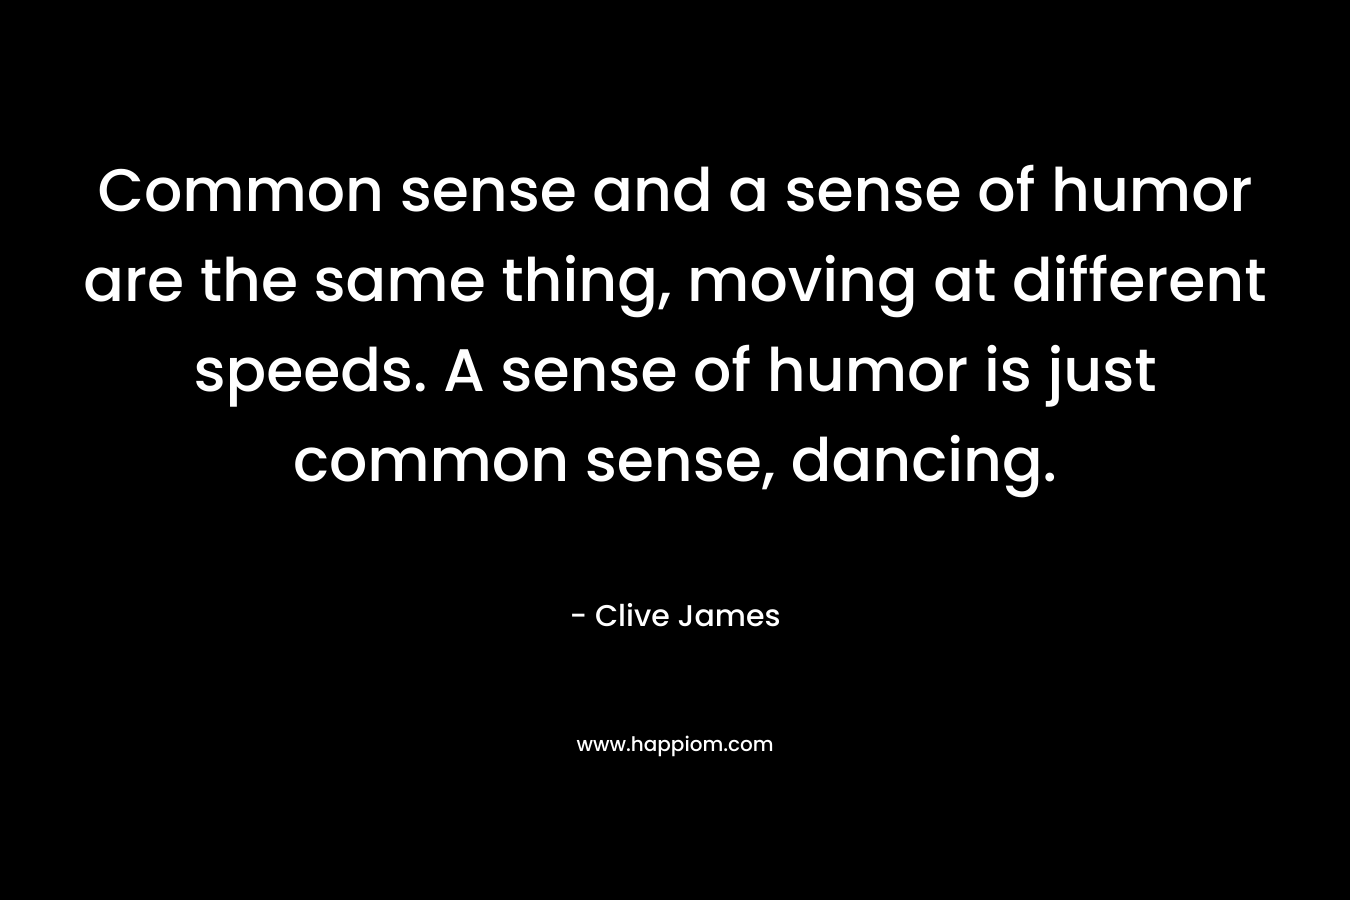 Common sense and a sense of humor are the same thing, moving at different speeds. A sense of humor is just common sense, dancing. – Clive James